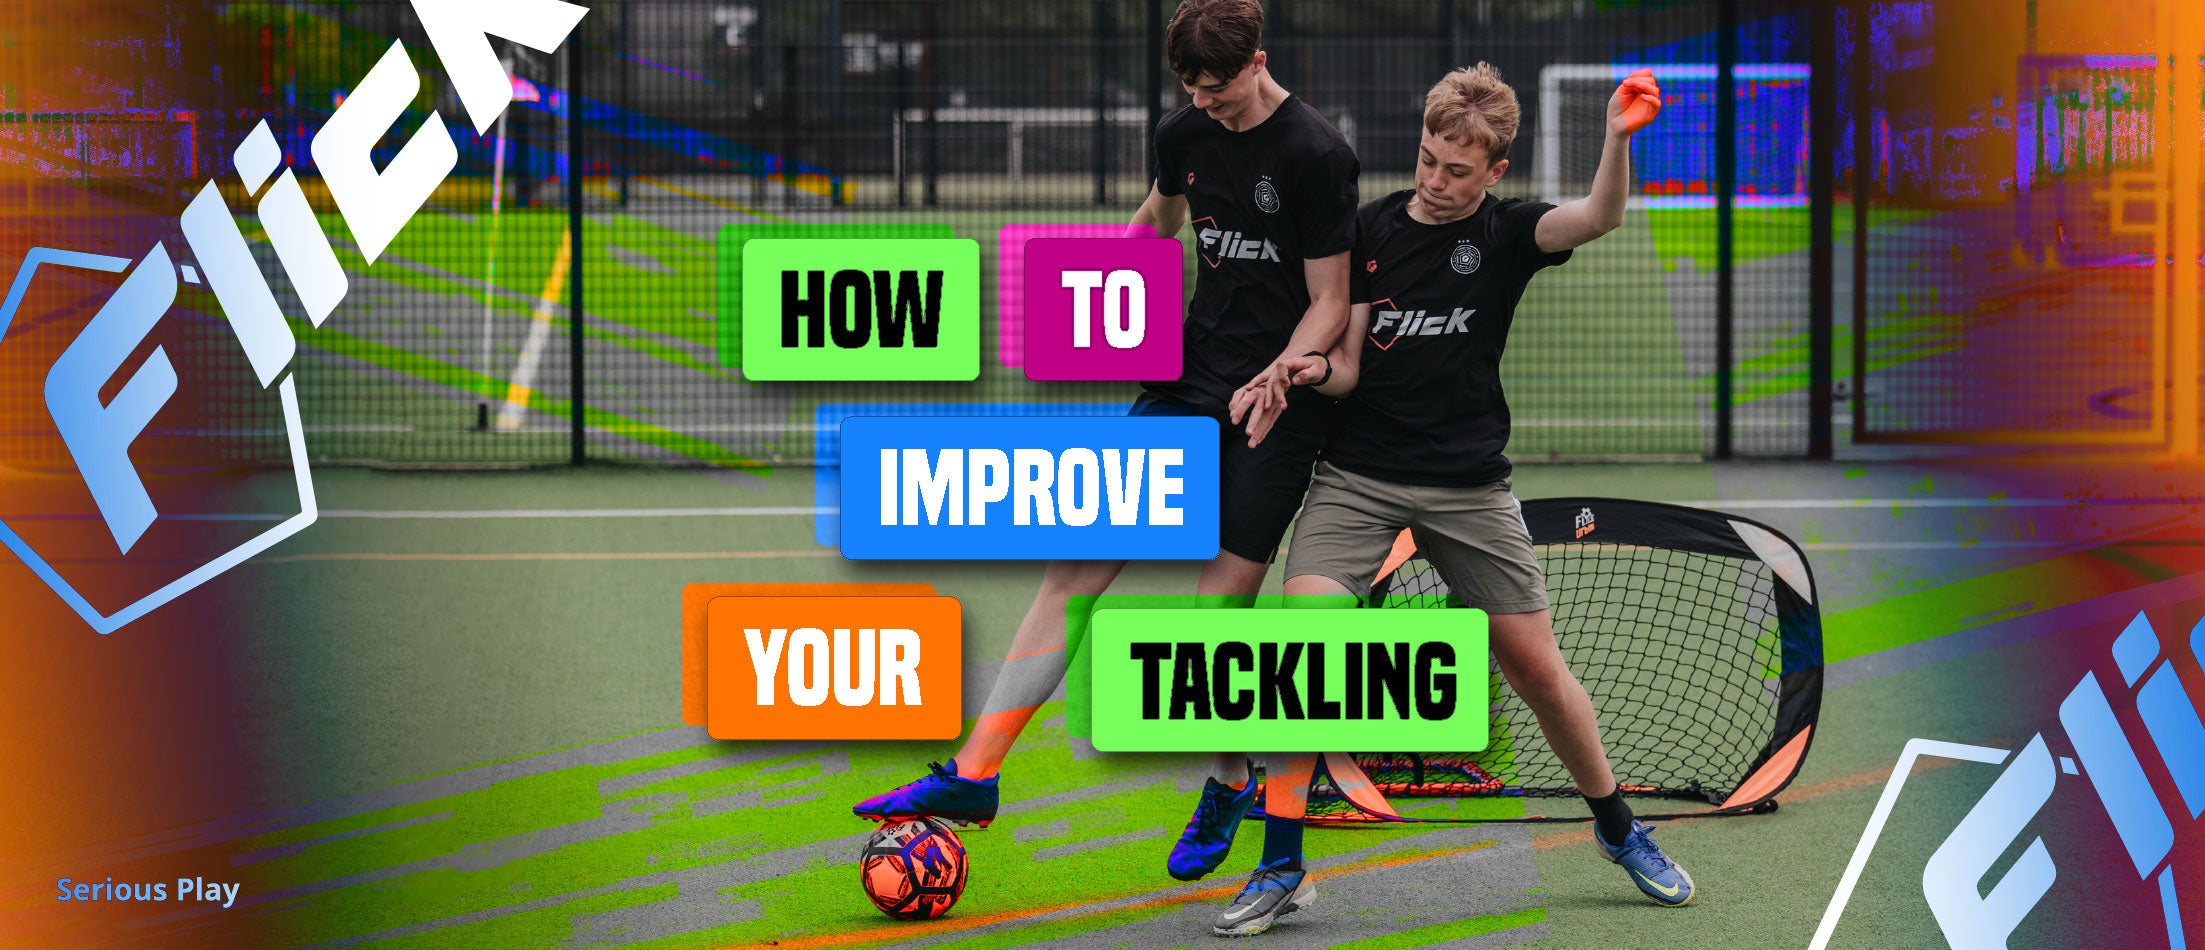 How to Improve your tackling